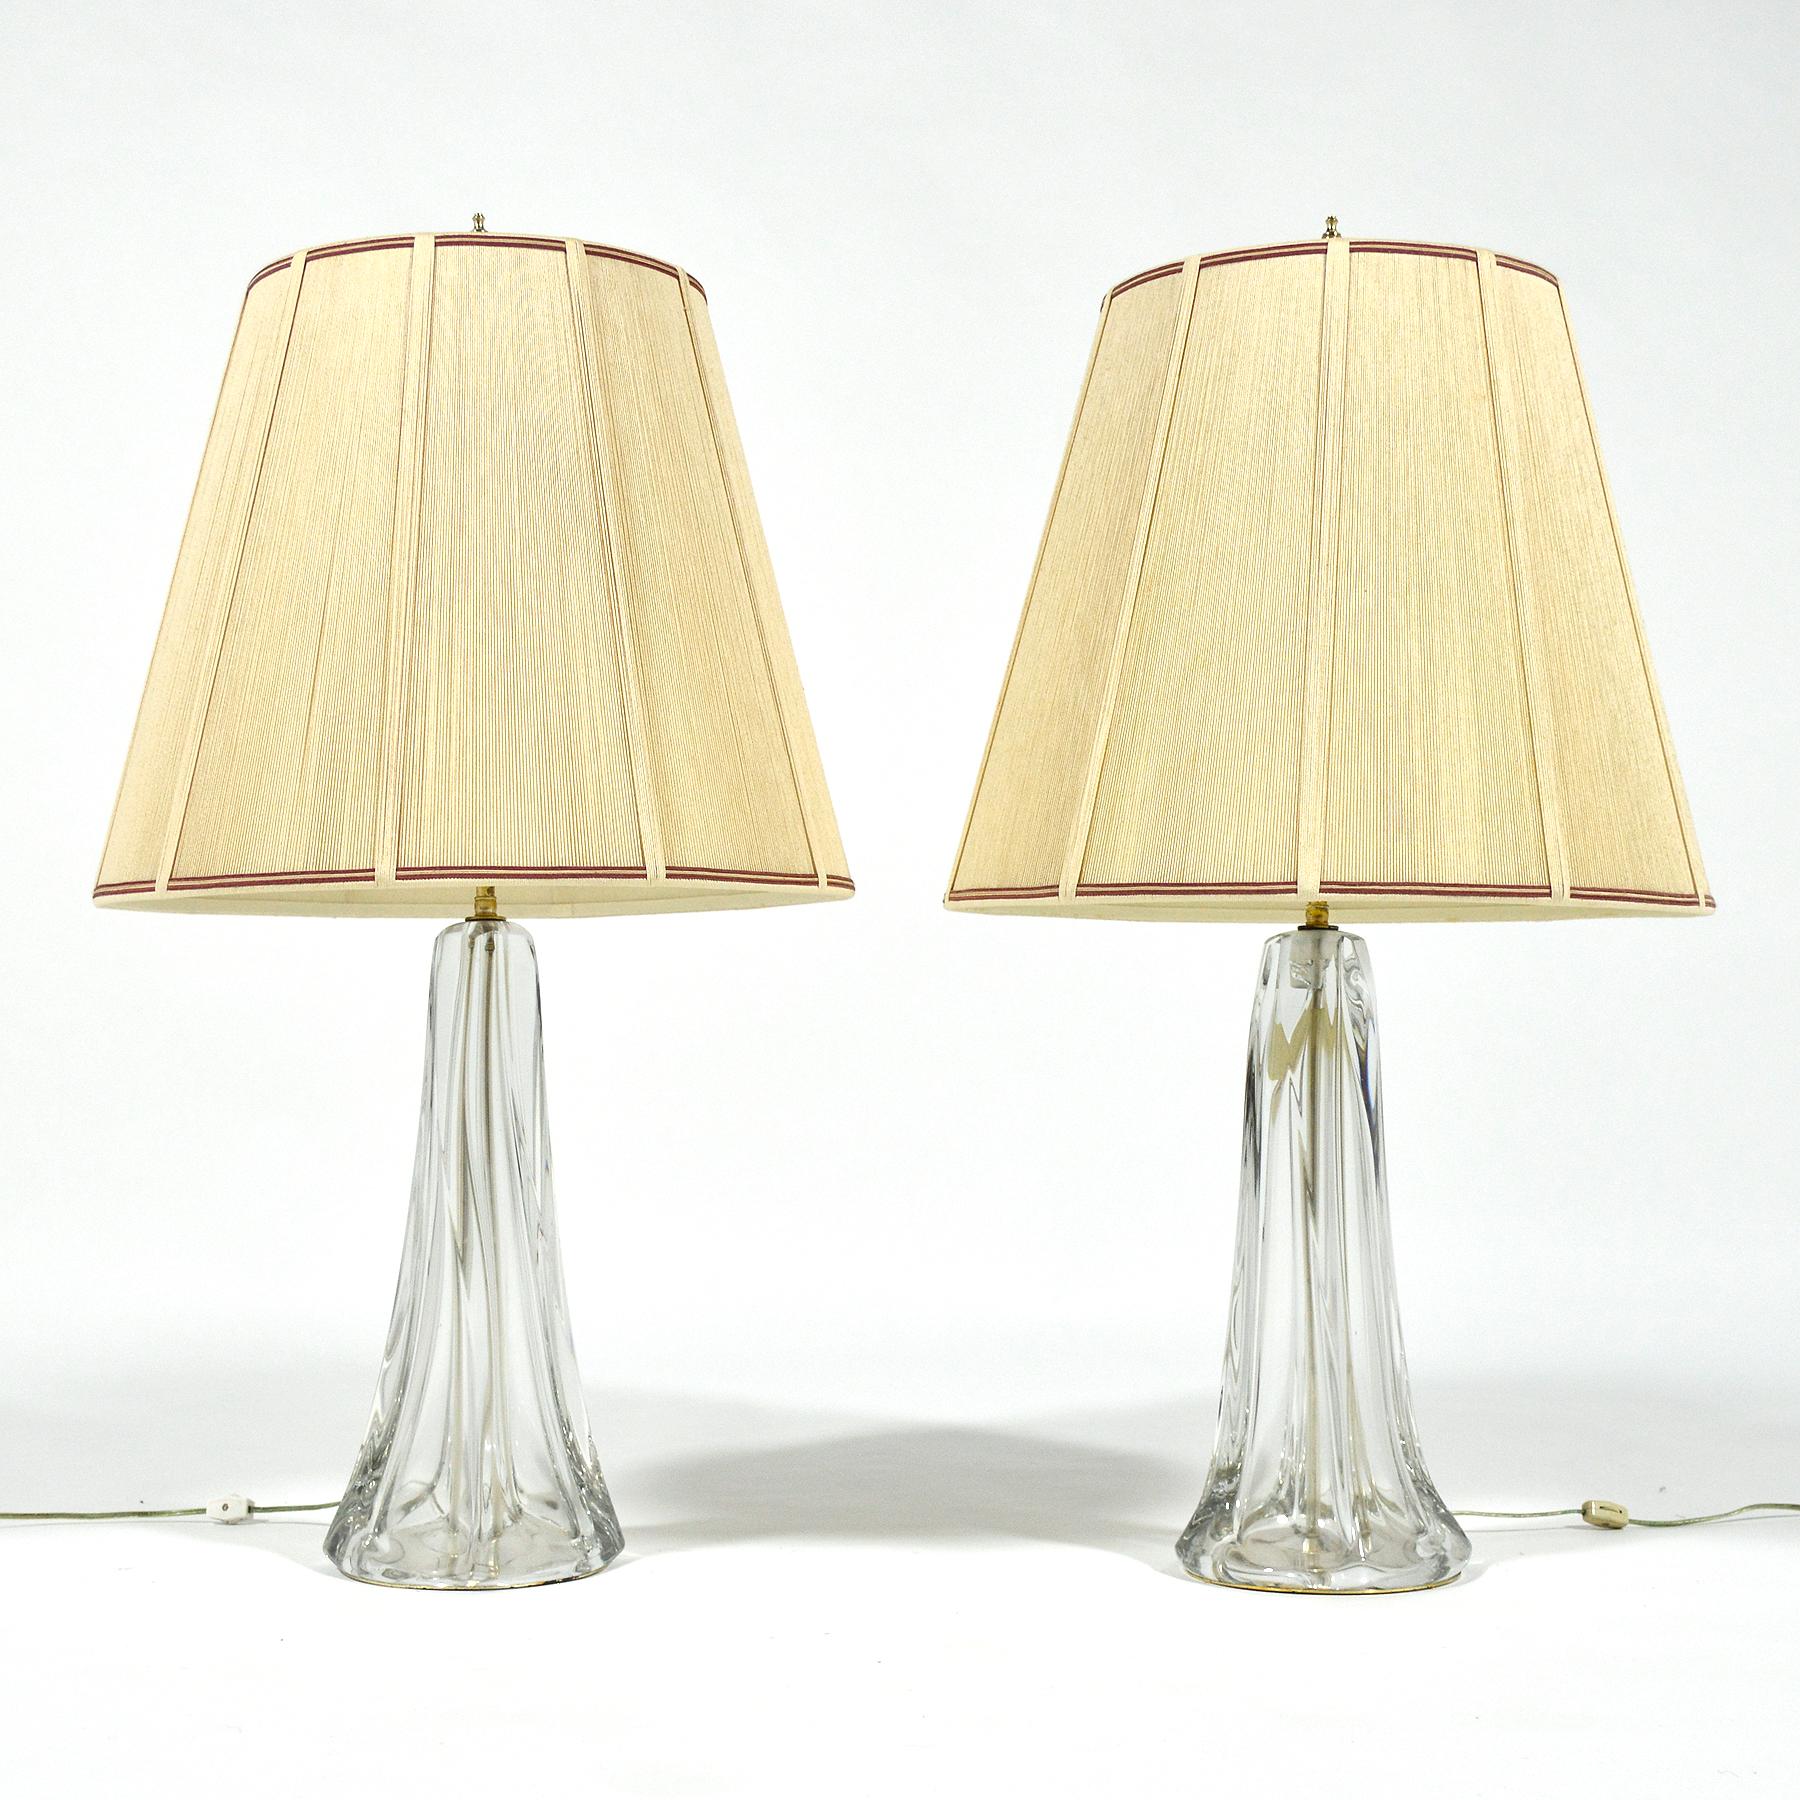 This extraordinarily beautiful pair of large crystal table lamps are unmarked, but are very similar to works by Val Saint Lambert. The substantial clear bases have a swirled form and support their original handmade string shades. With three bulb/